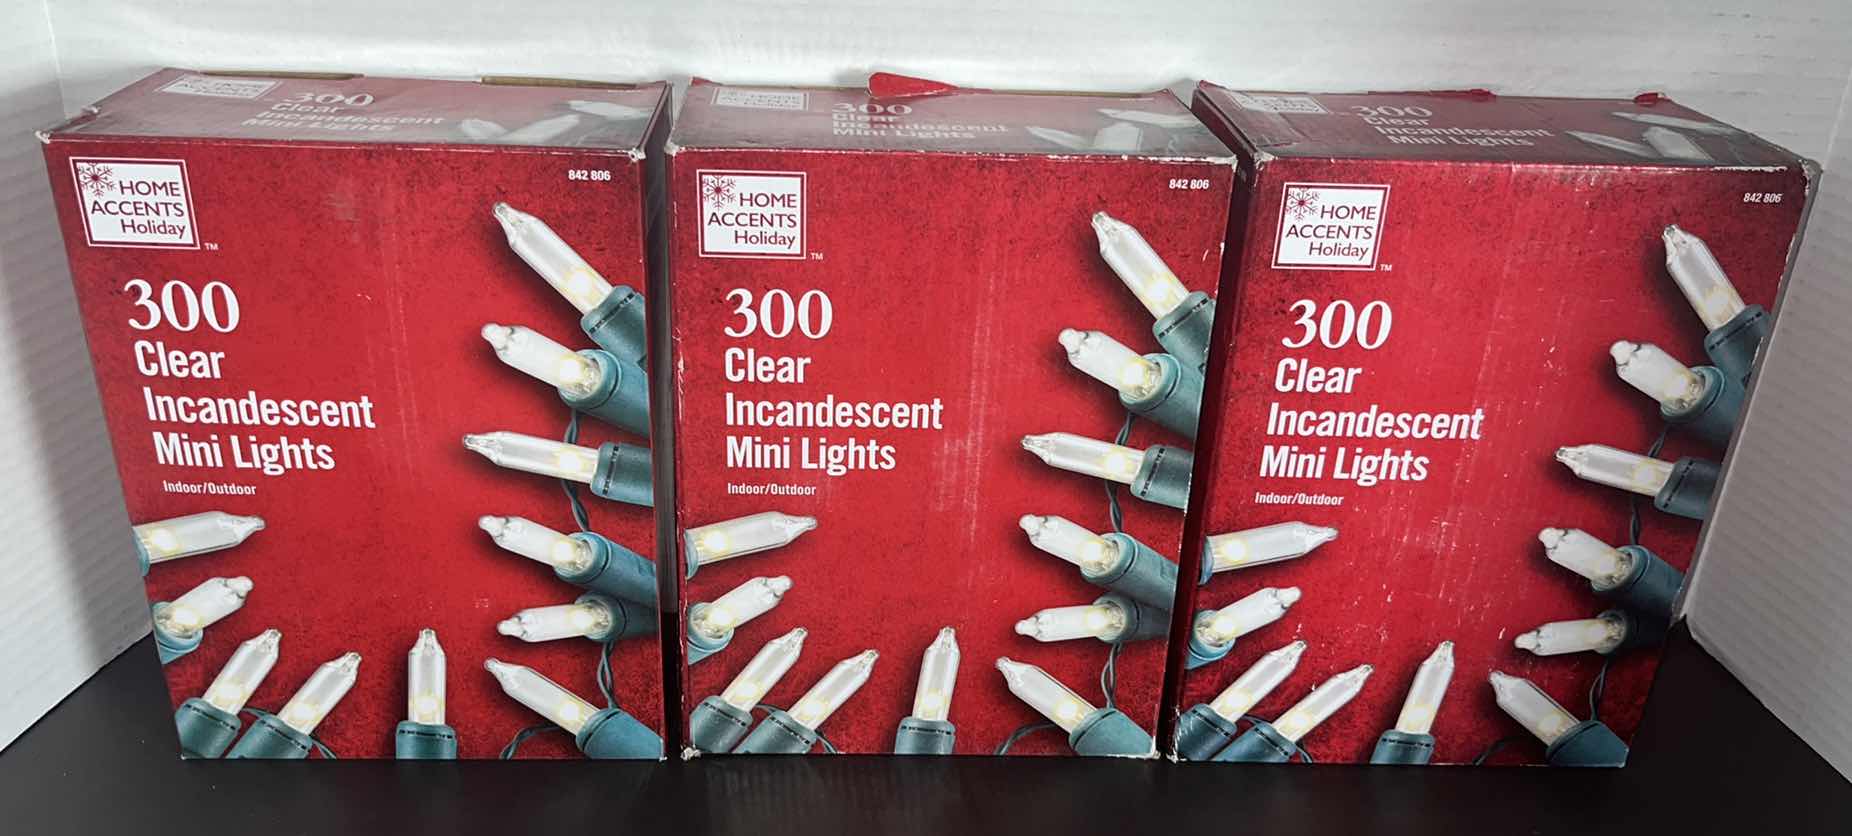 Photo 1 of NEW HOME ACCENTS HOLIDAY 300 CLEAR INCANDESCENT MINI LIGHTS #842806 (3)